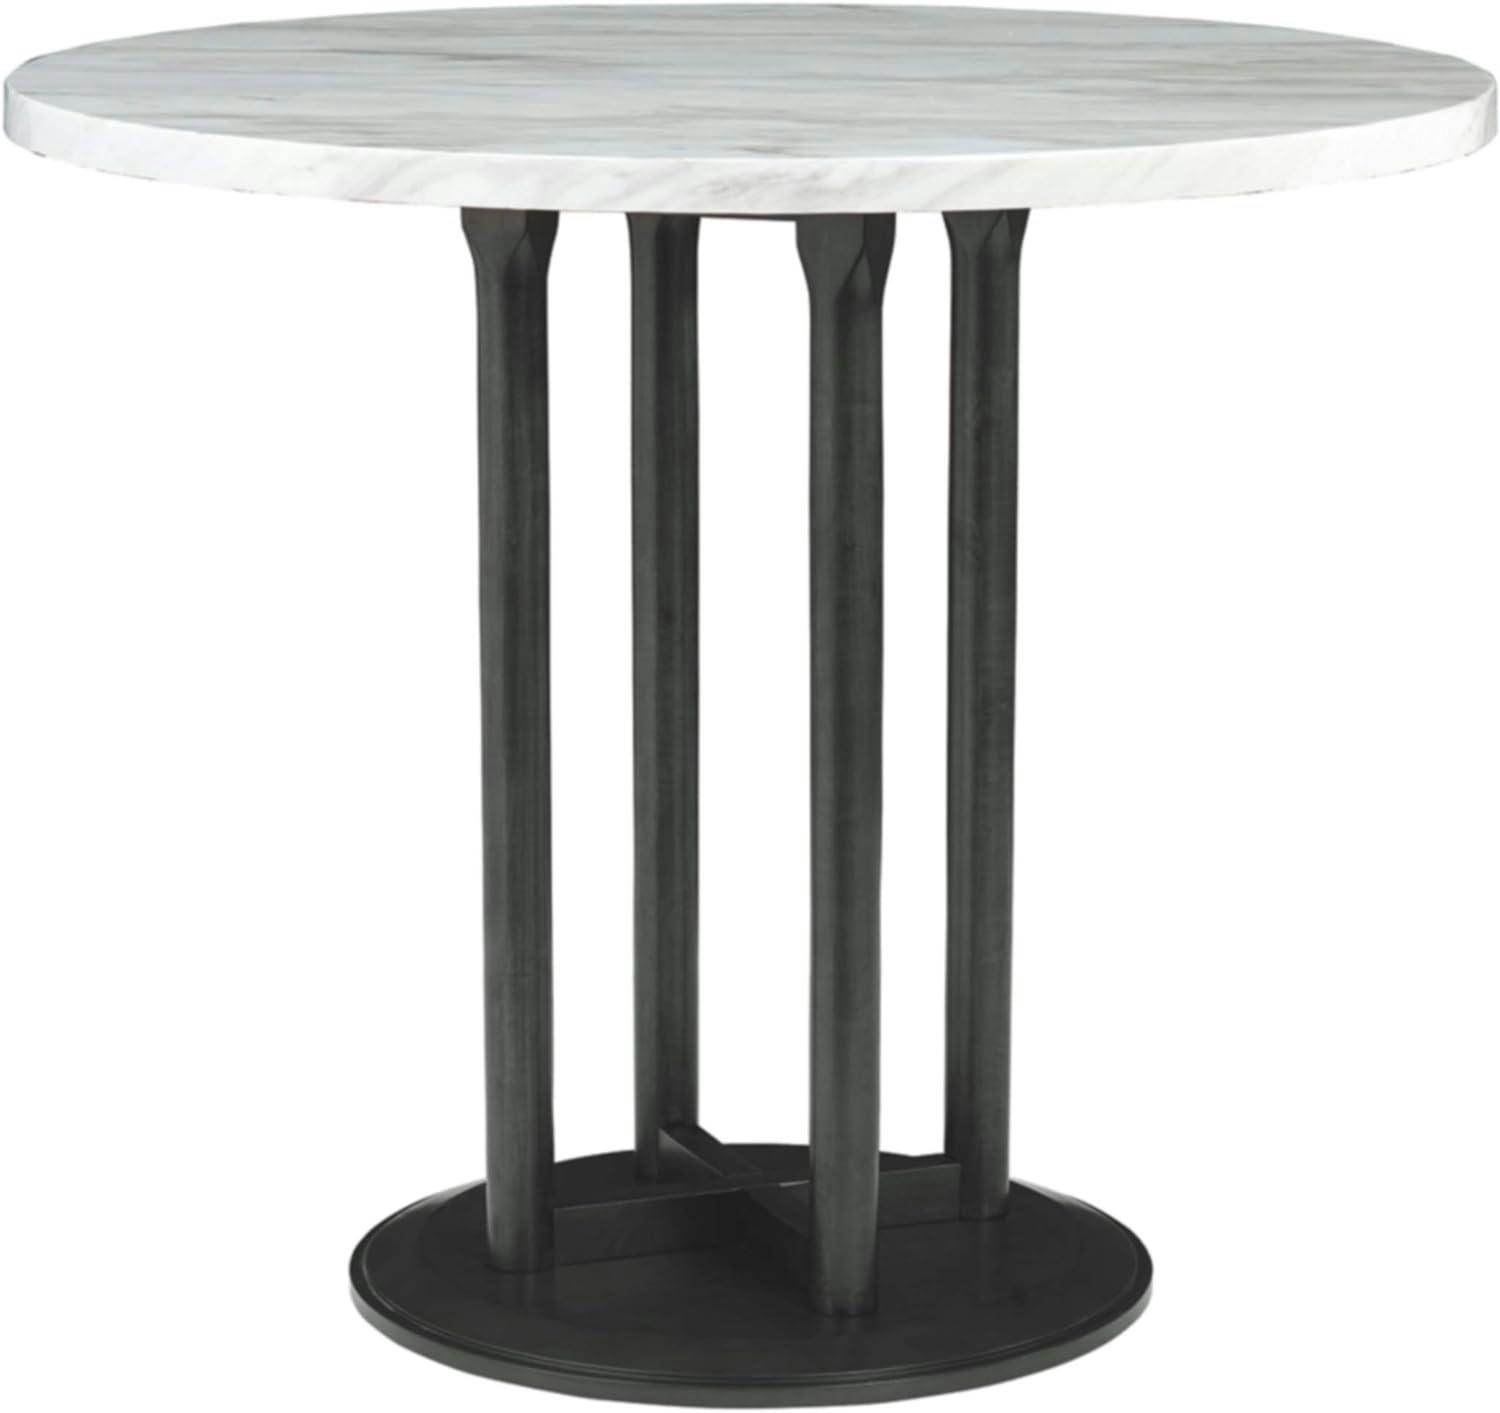 Transitional Carrara Marble 42" Round Counter-Height Table in Brown